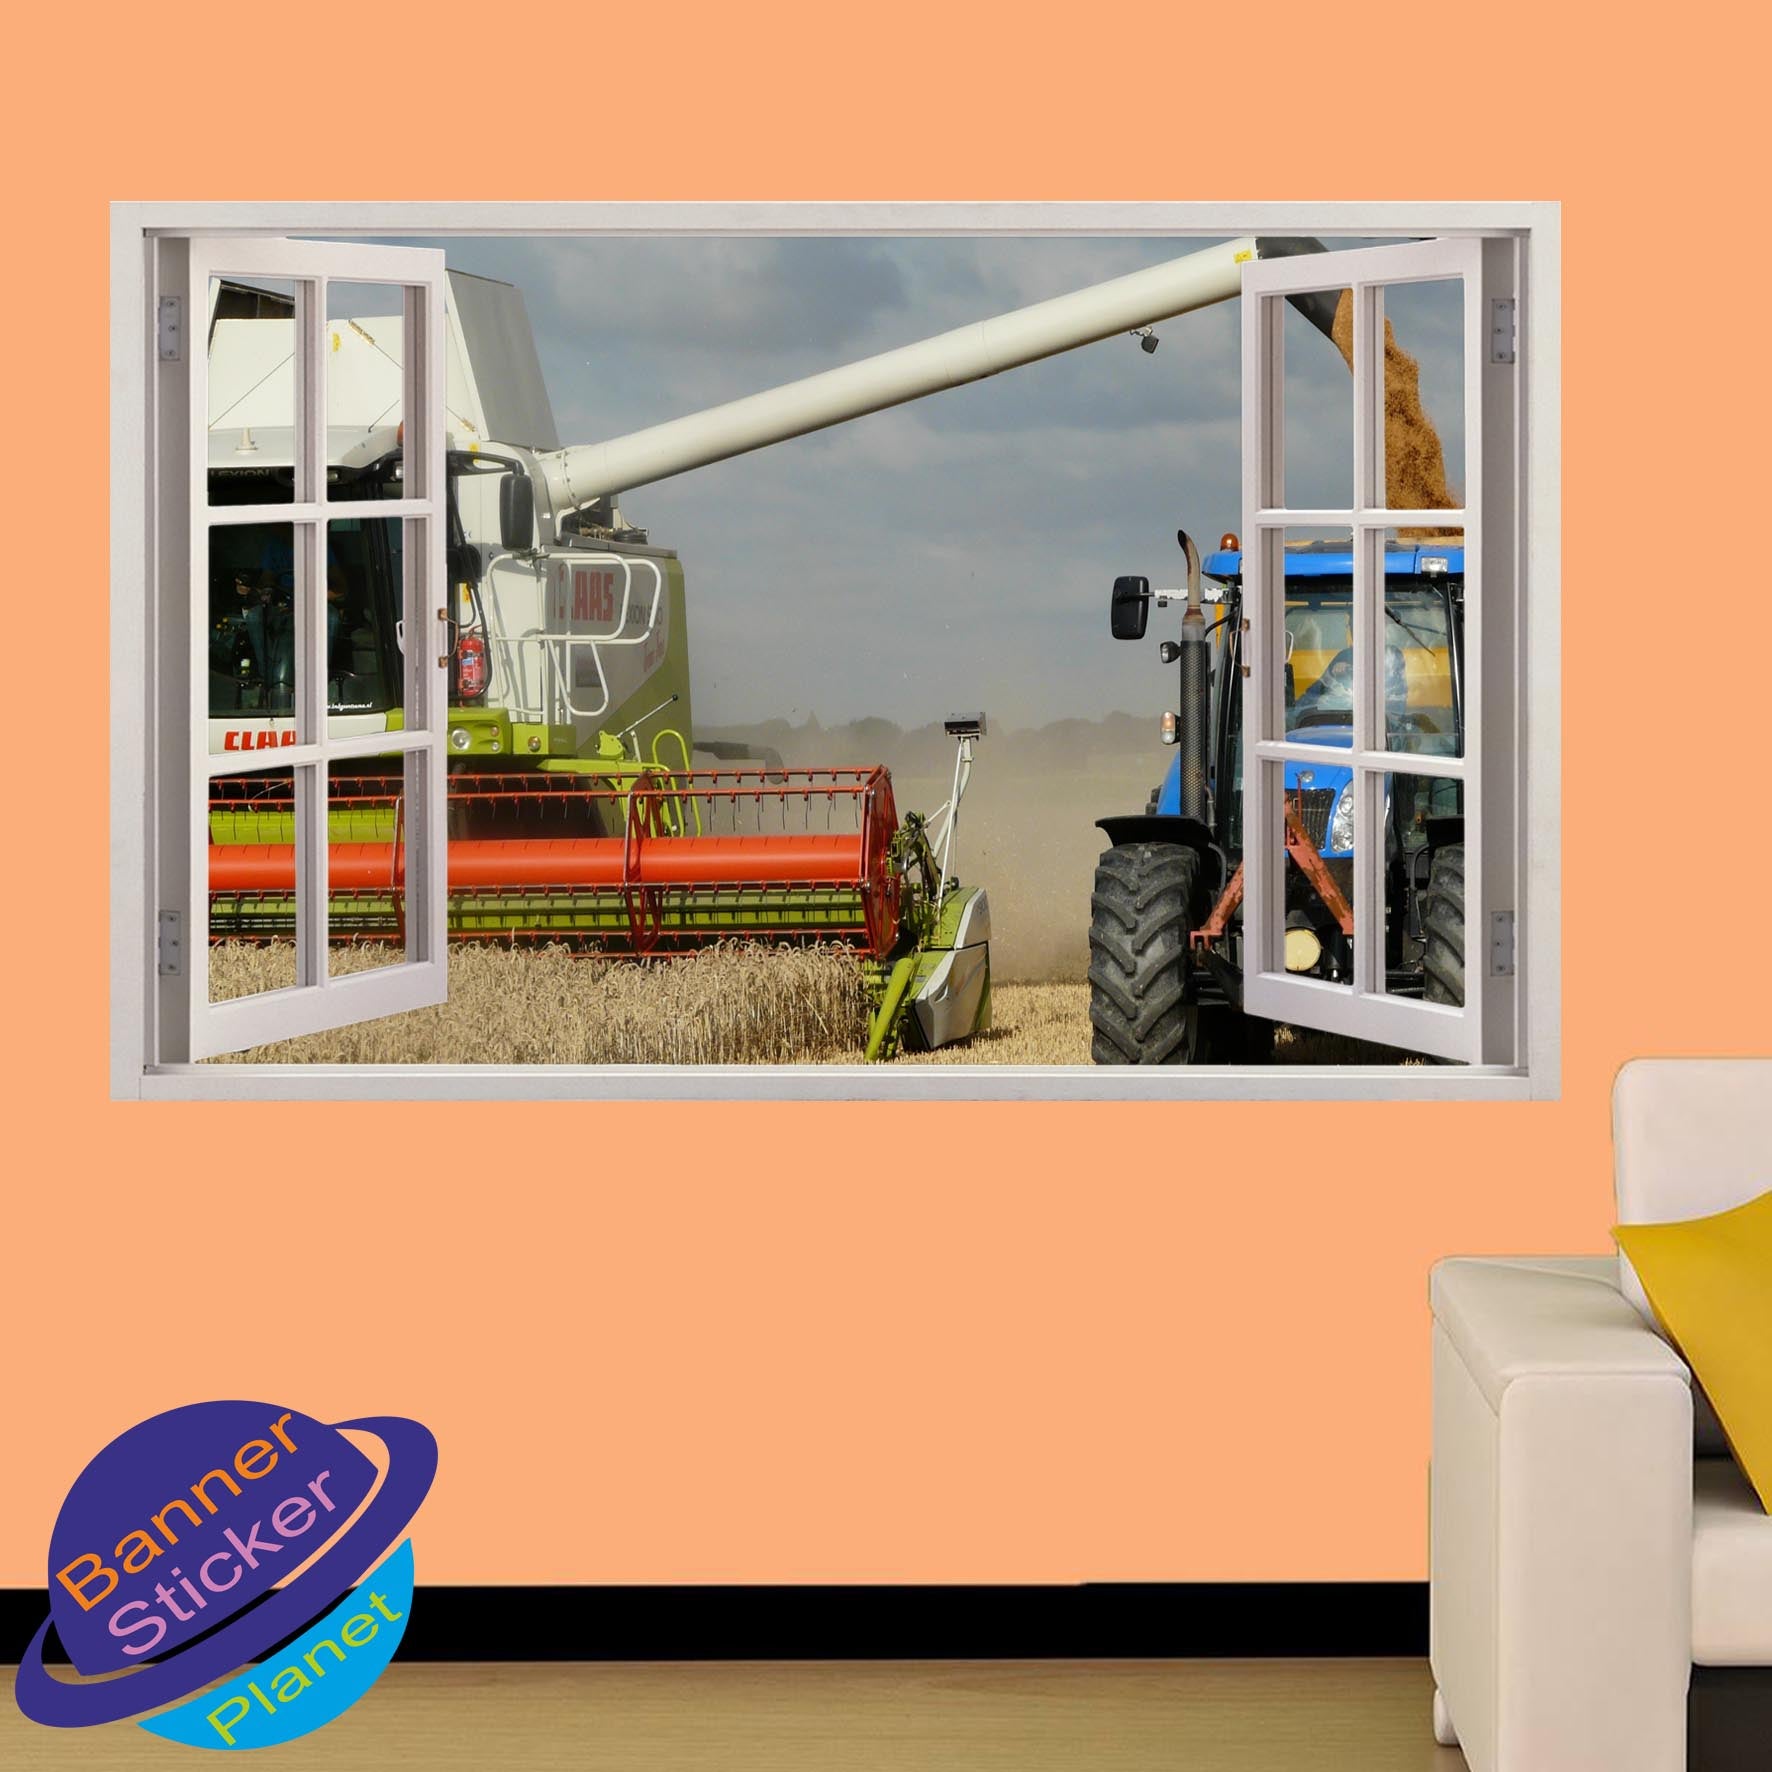 CLAAS COMBINE HARVESTER AND TRACTOR WALL STICKER